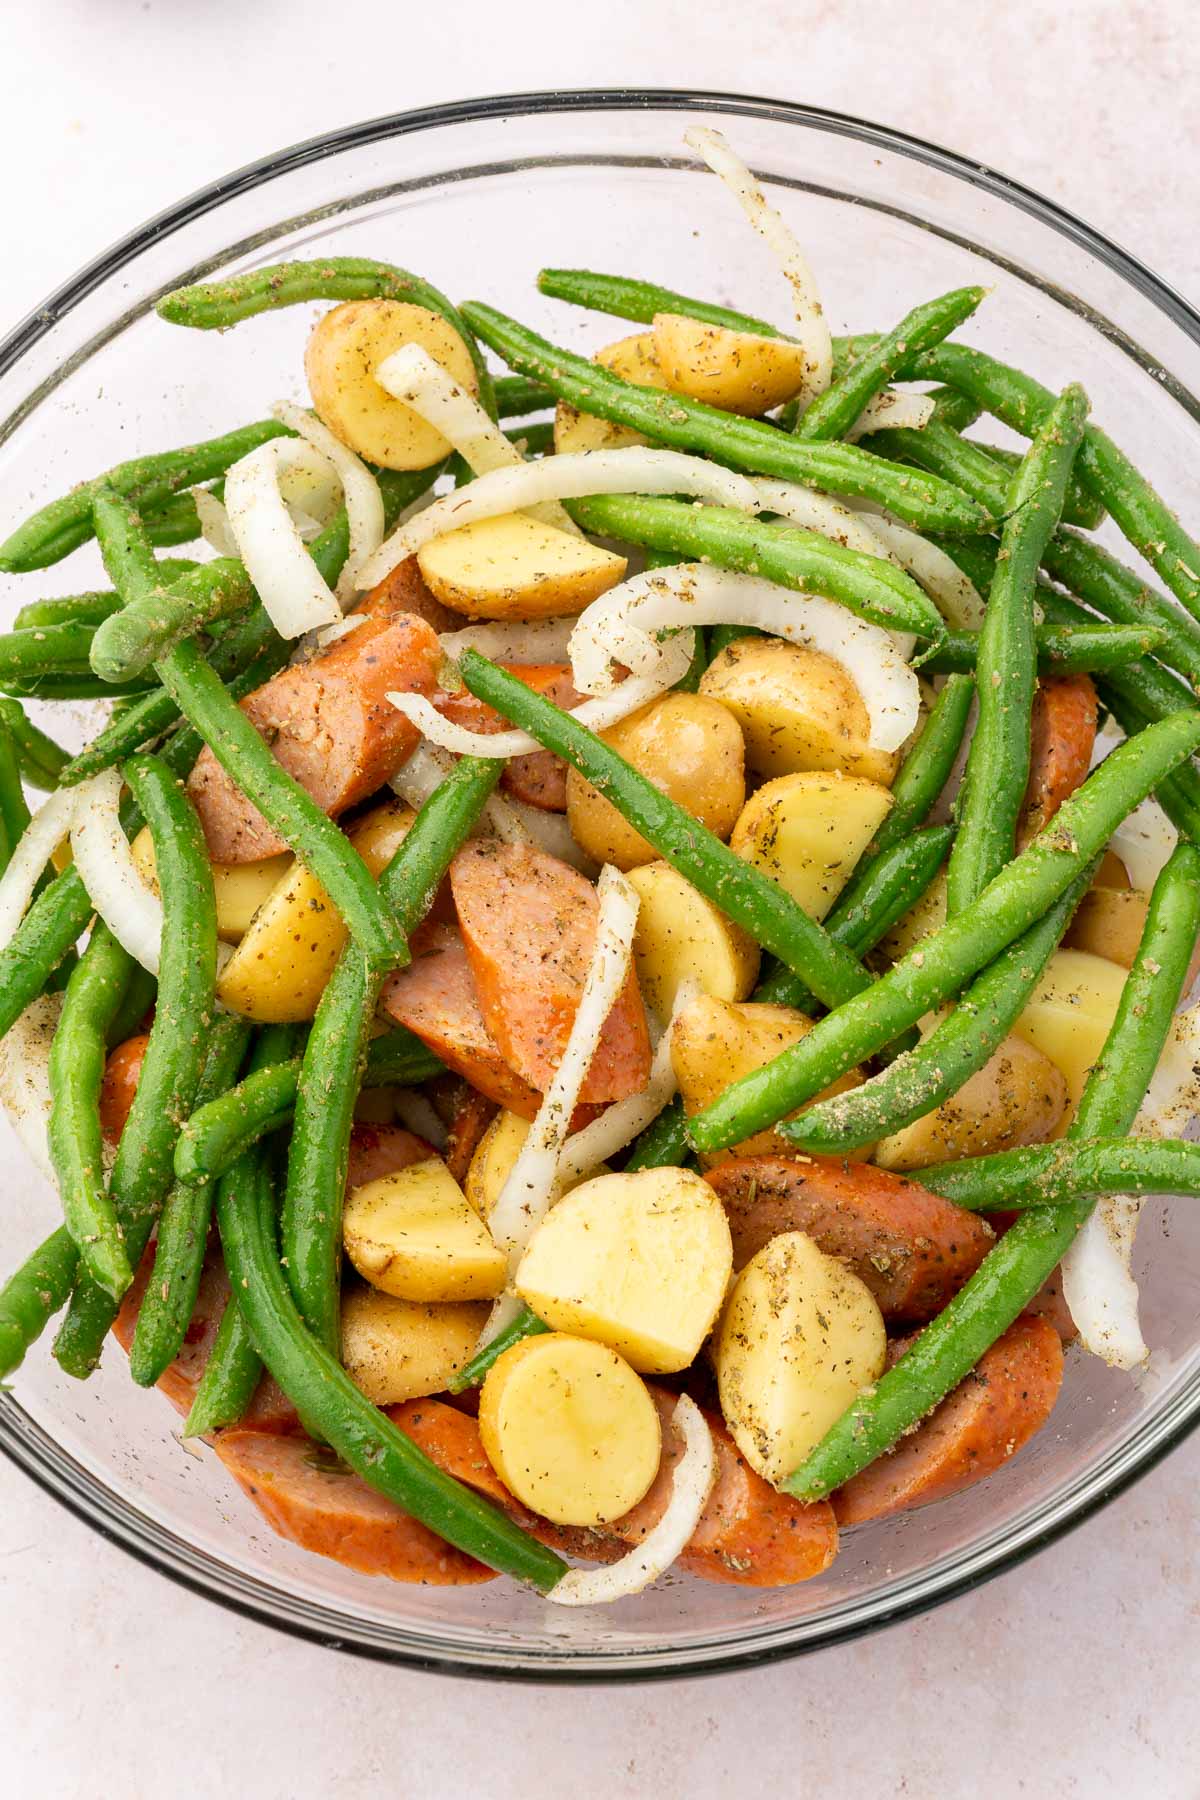 a glass bowl filled with green beans, sausage, onions and potatoes tossed in oil and spices.